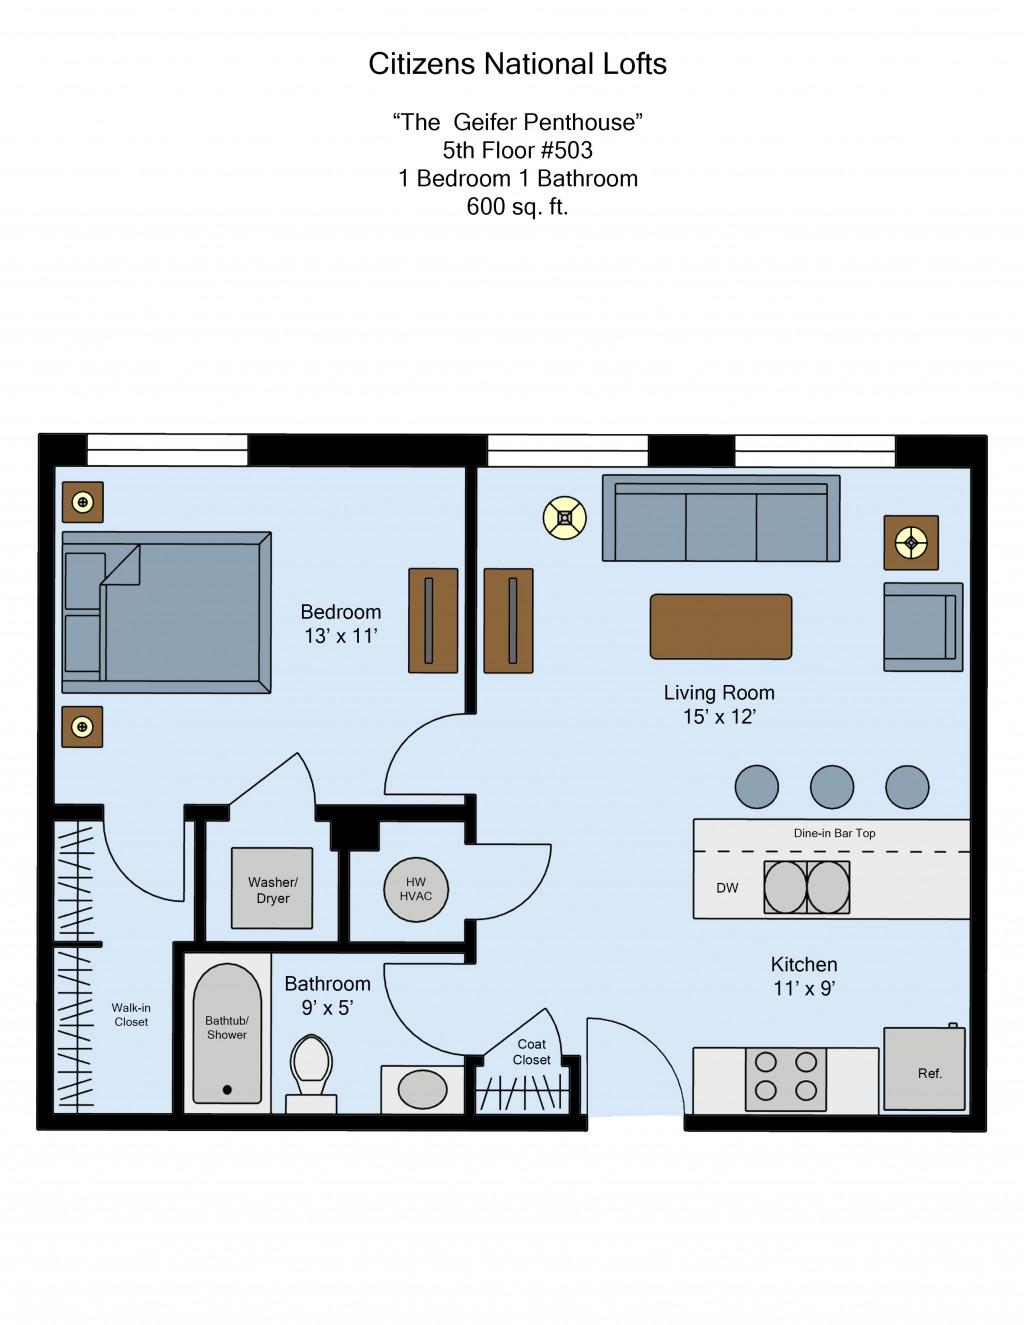 Citizens National Lofts 1-Bed 